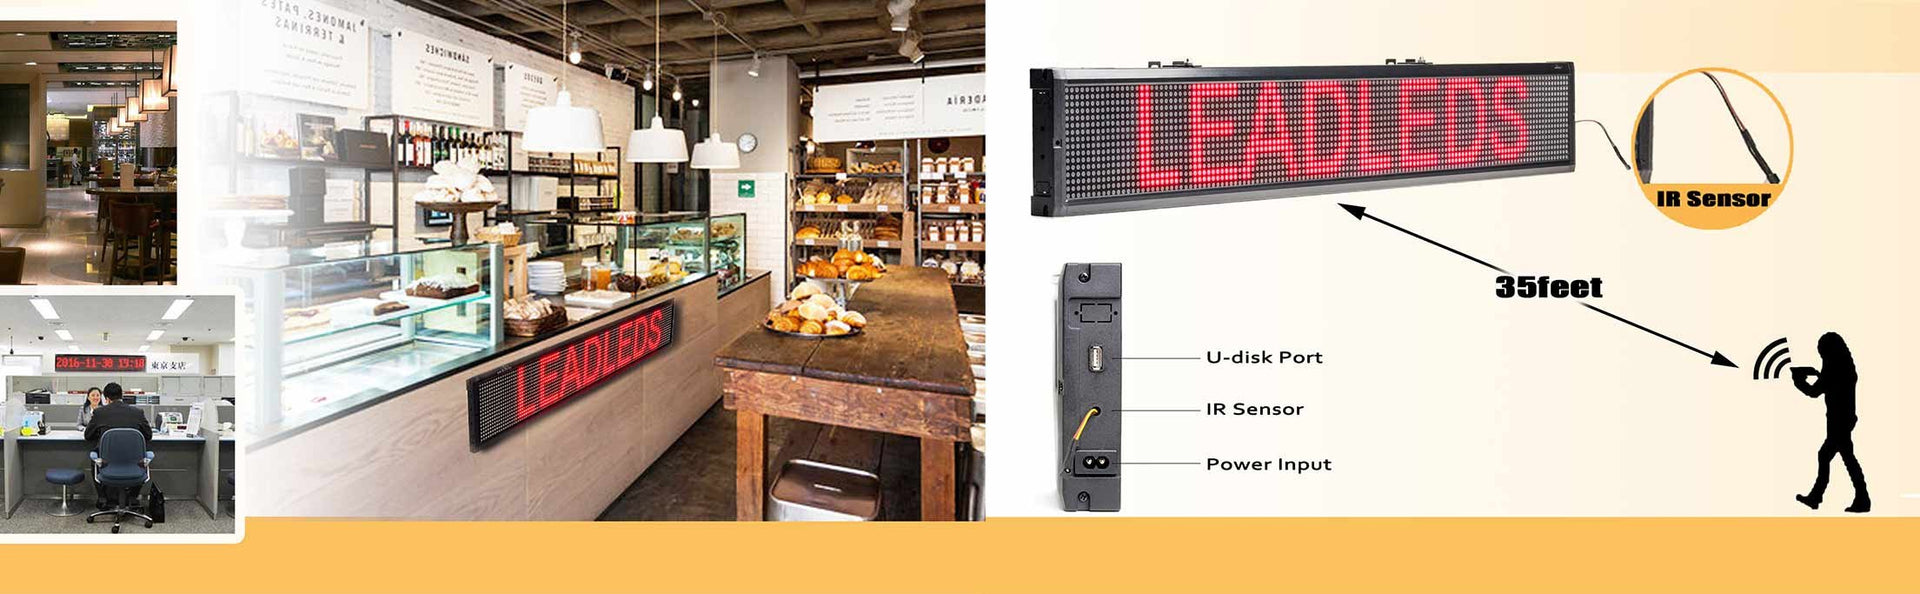 remote led signs